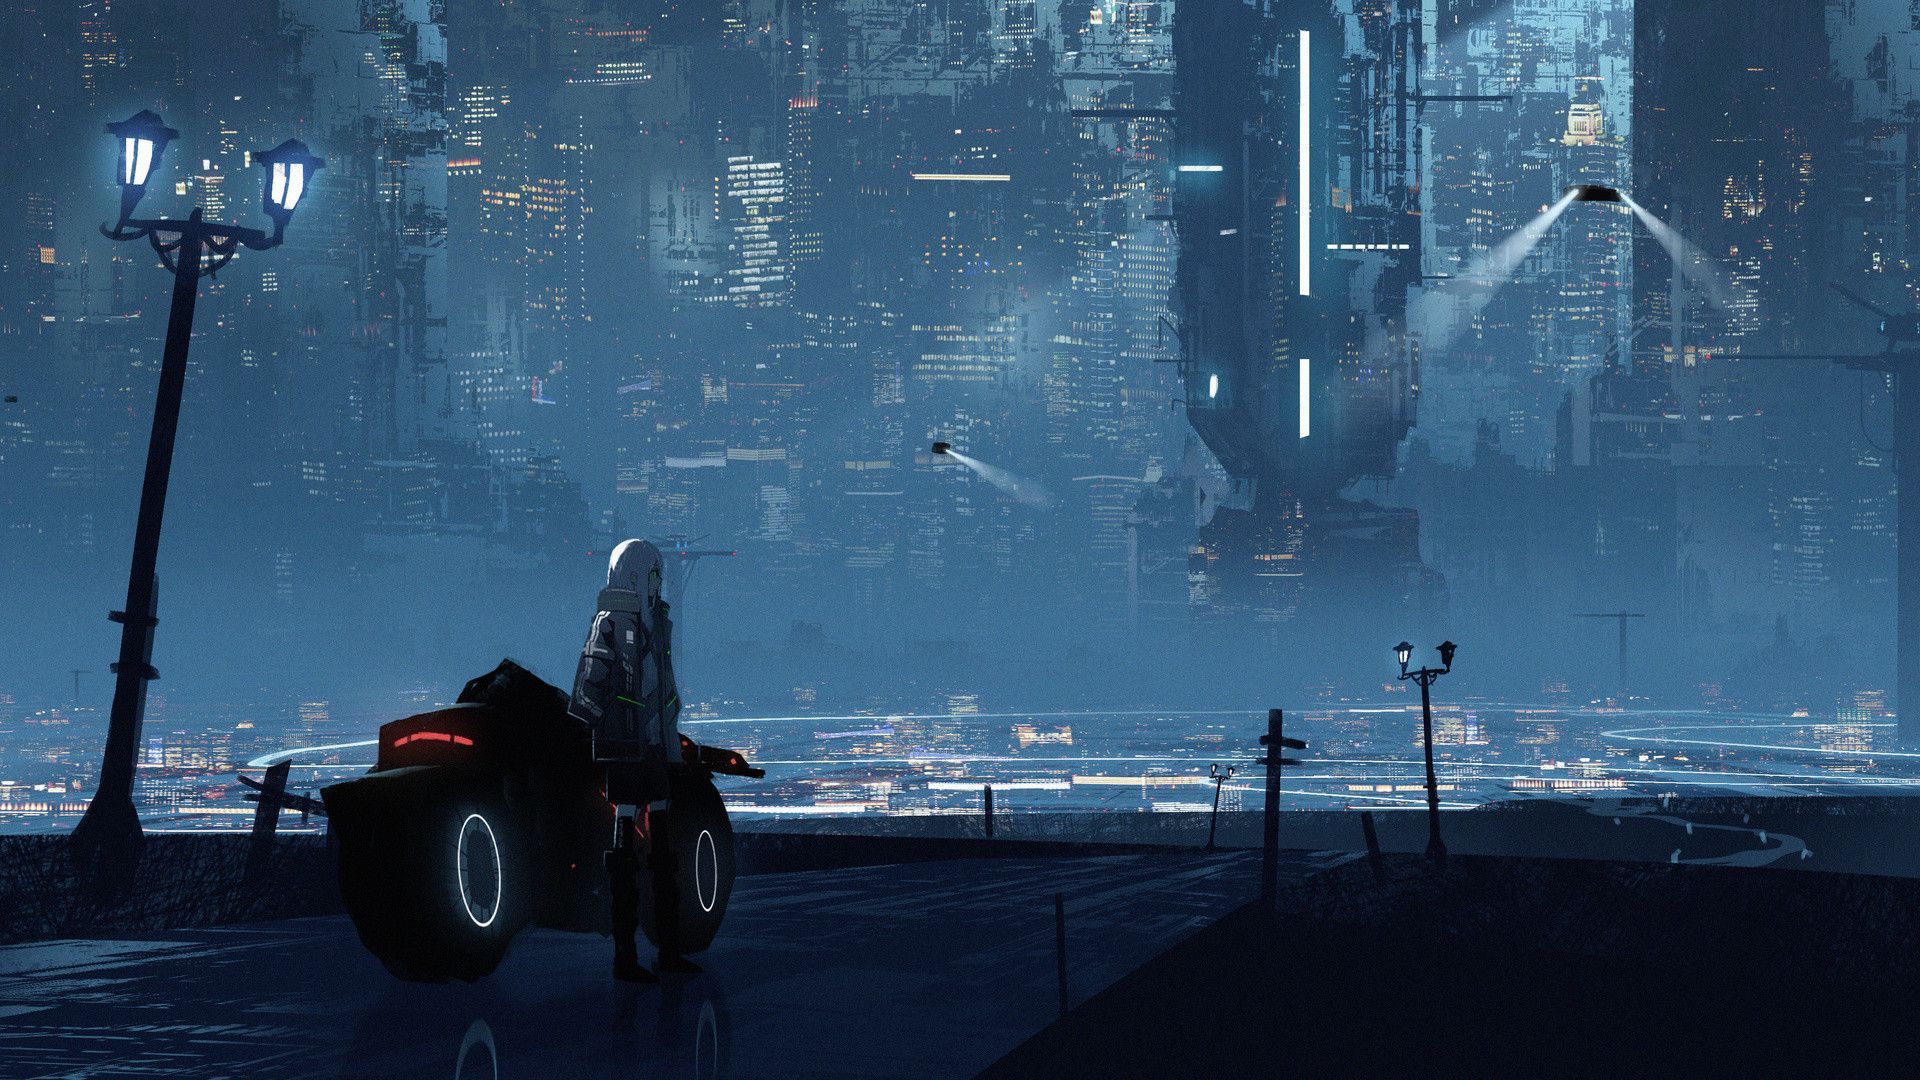 1920x1080 Cyberpunk City wallpaper for your PC, laptop and mobile devices - Cyberpunk